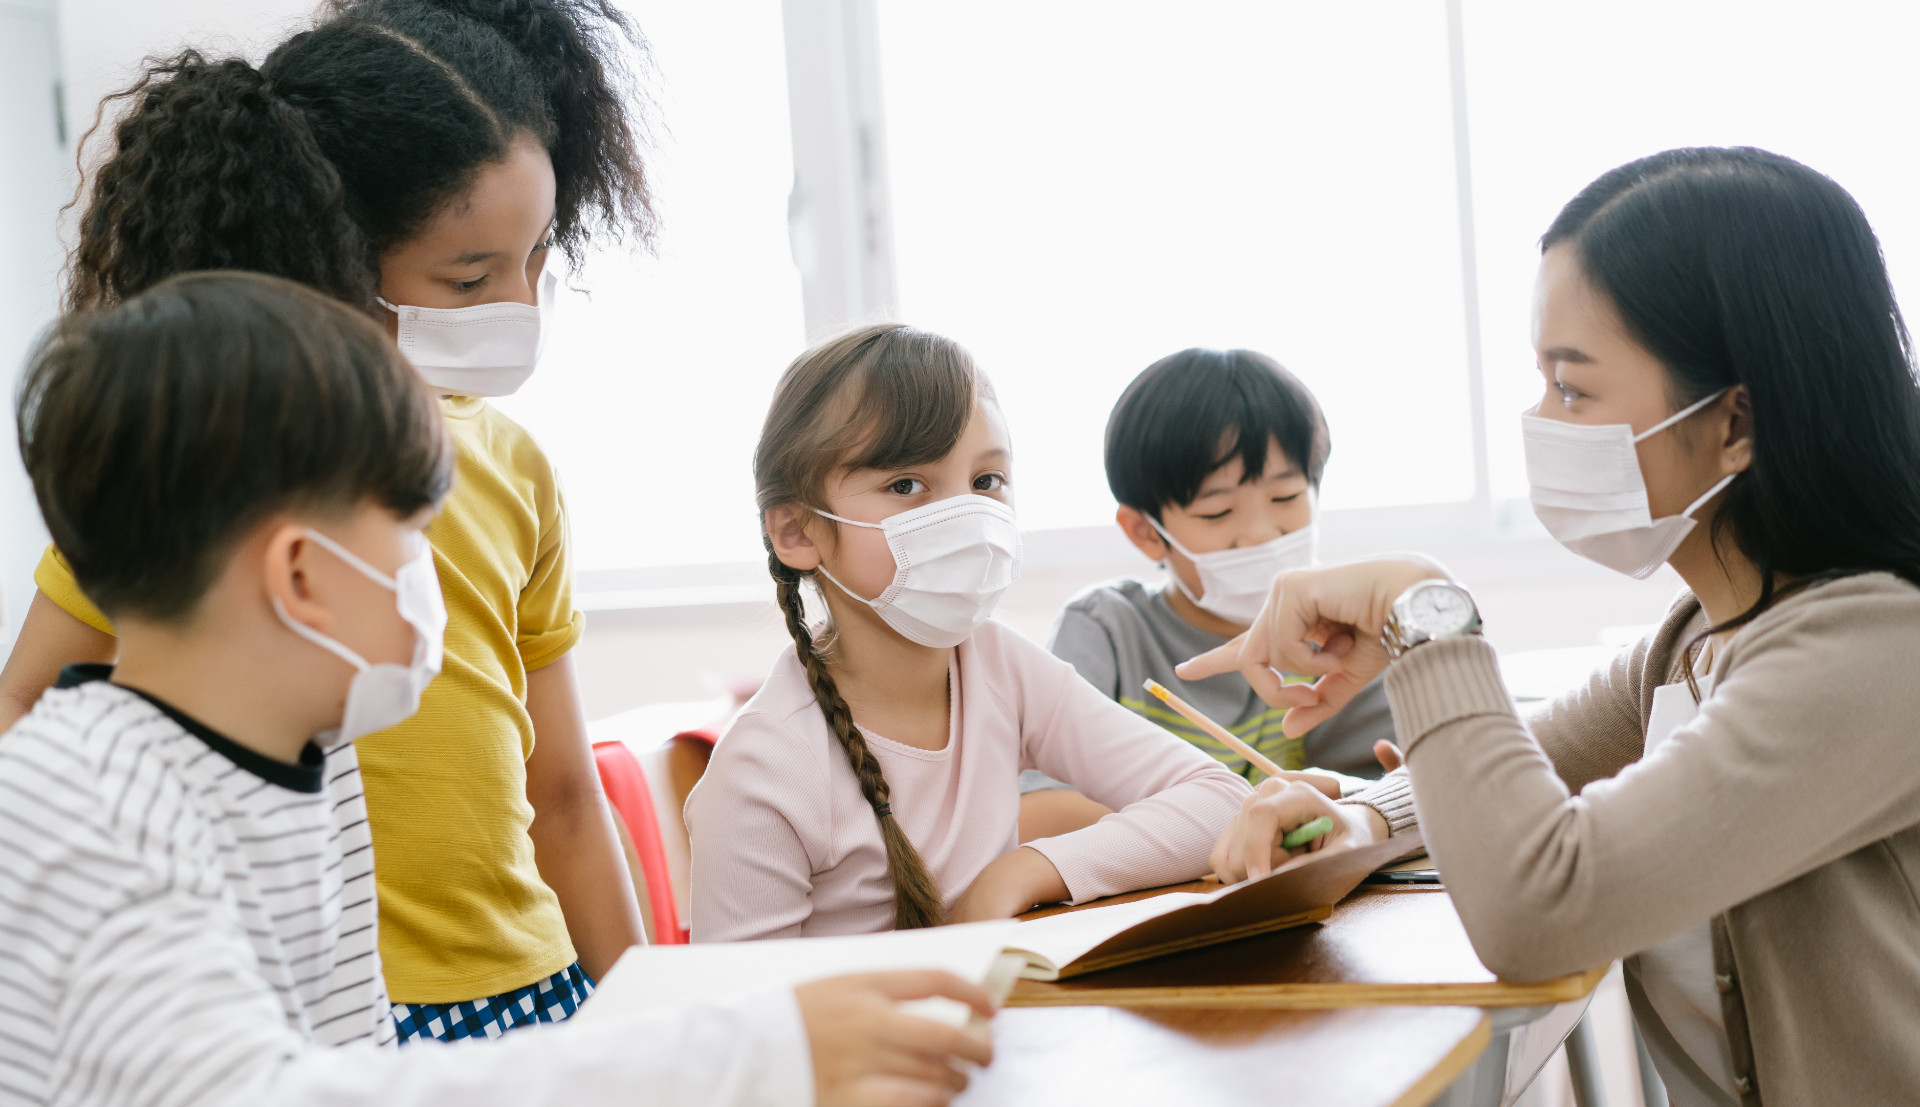 A teacher works with her students, all wearing face masks